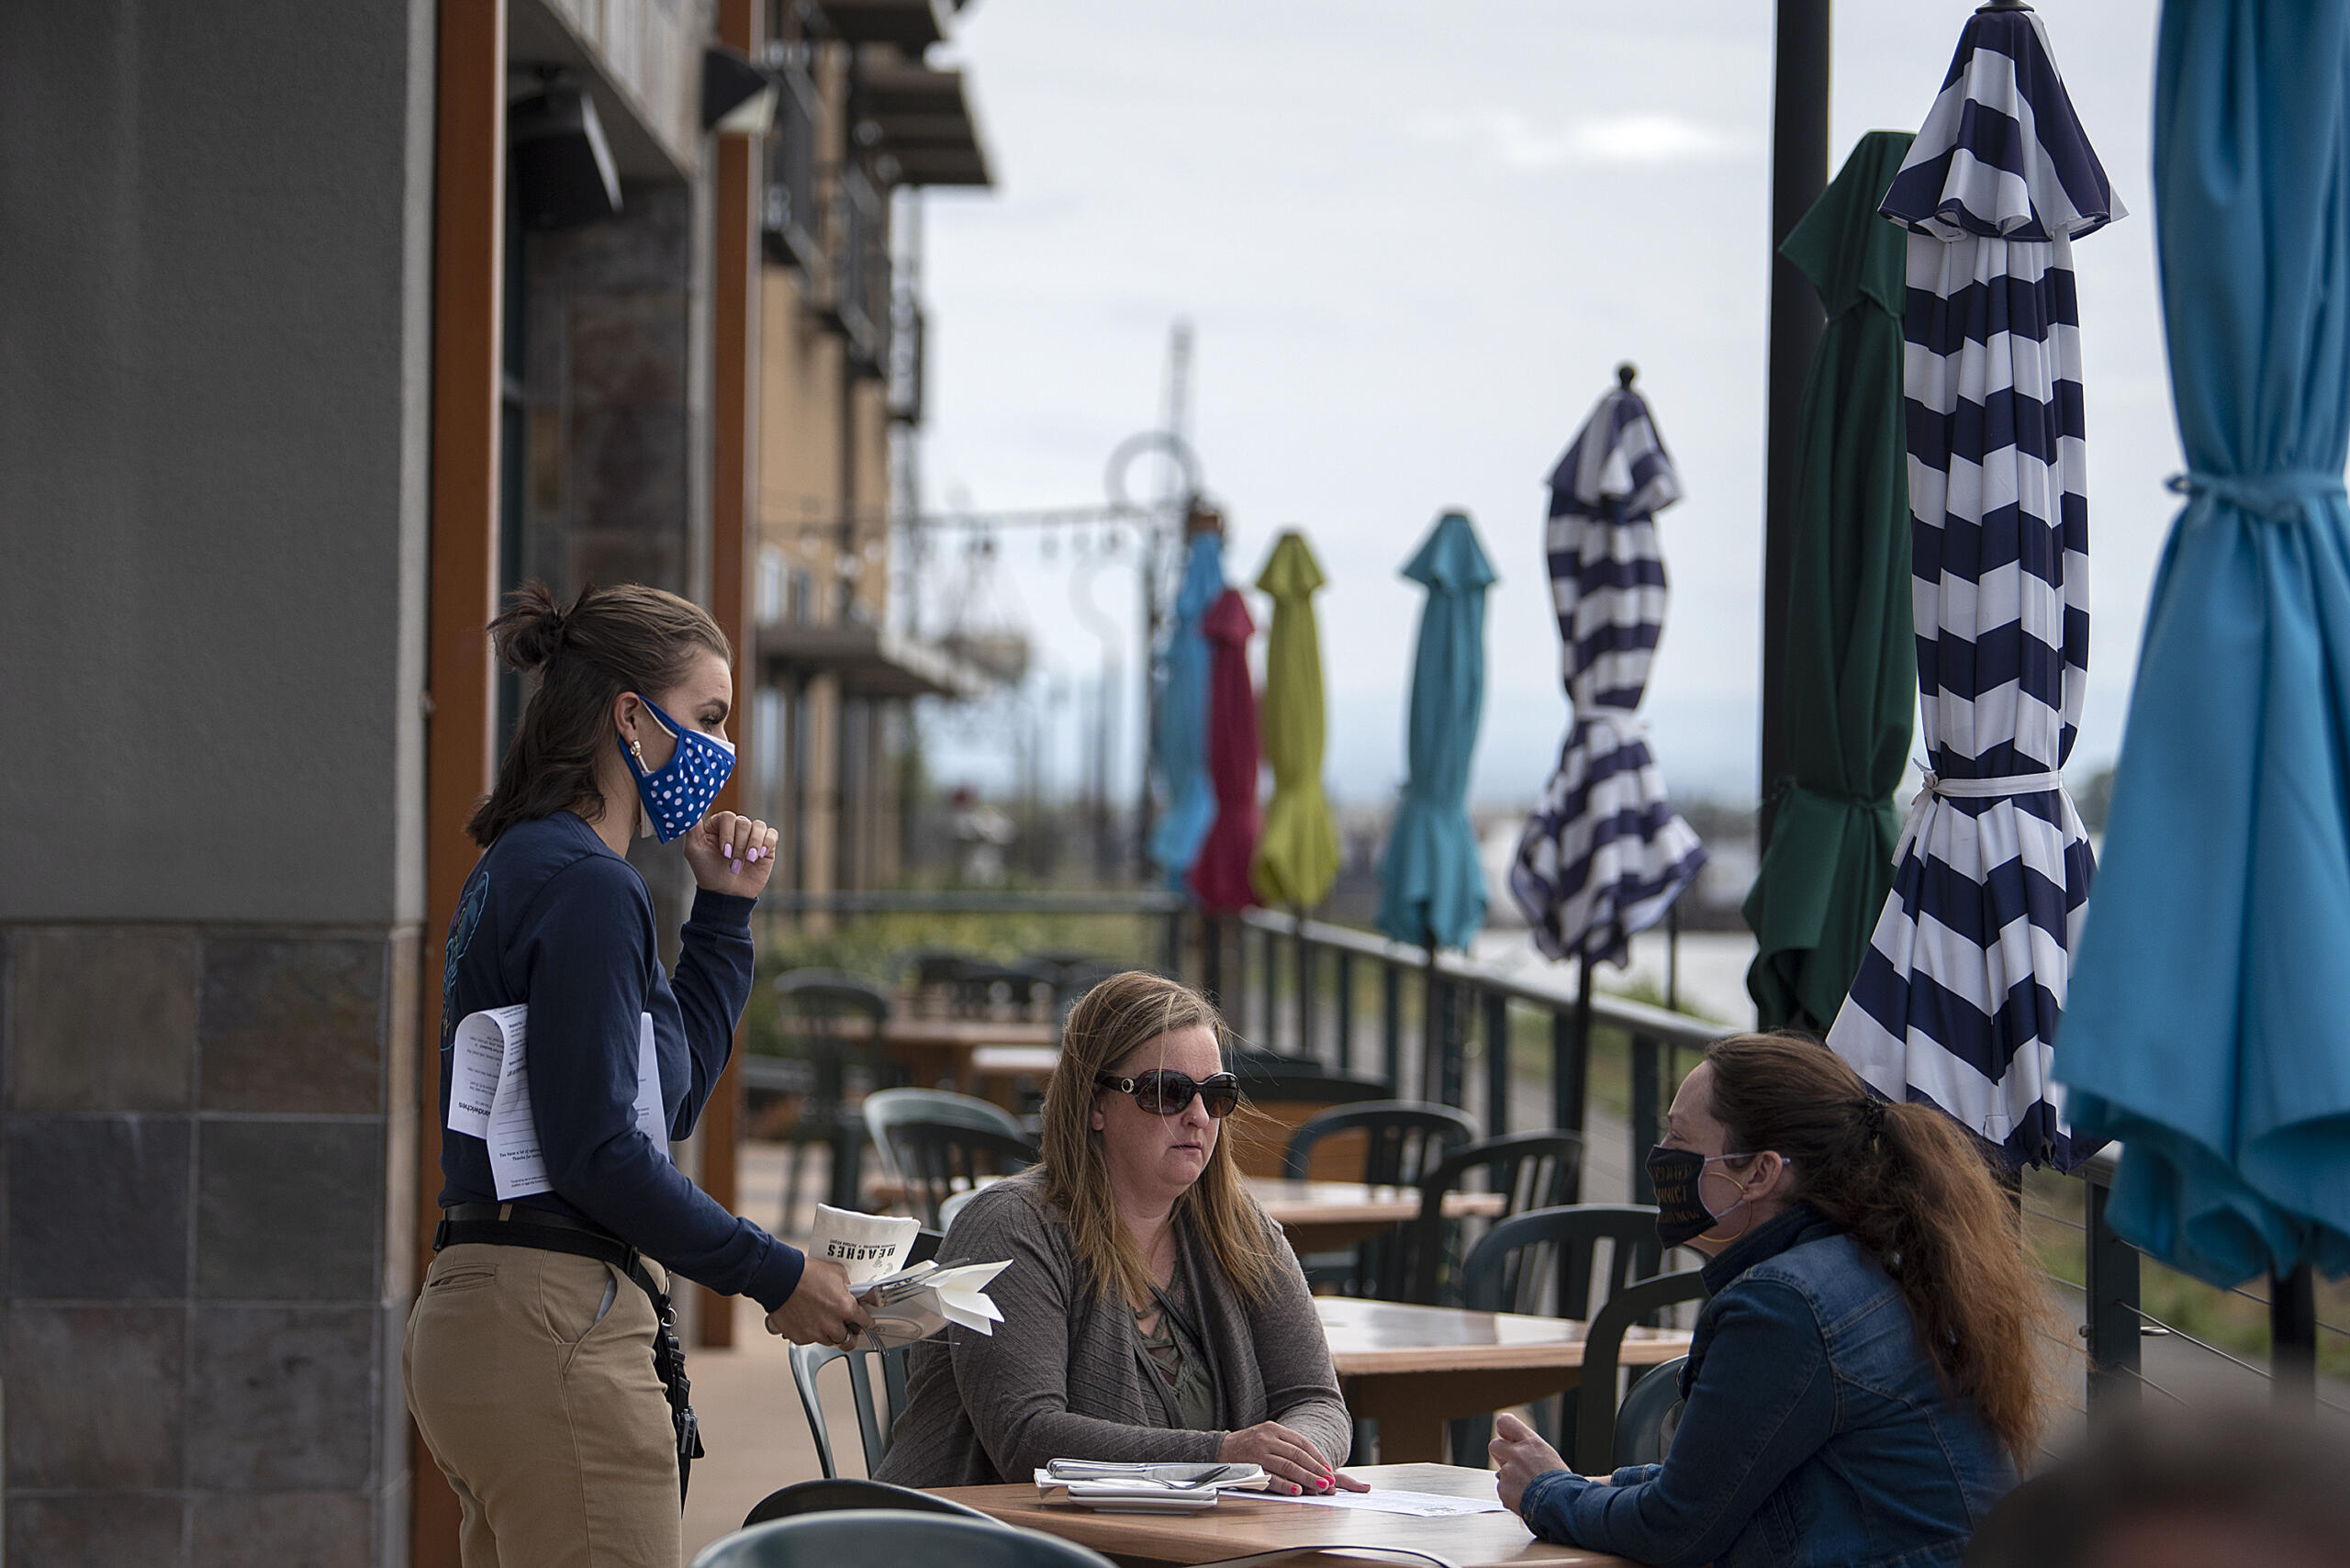 Mackenzie Samuelson, from left, of Beaches restaurant chats with customers Andrea Pelton and Maegan Davies while stopping by their table on Thursday morning, May 6, 2021.